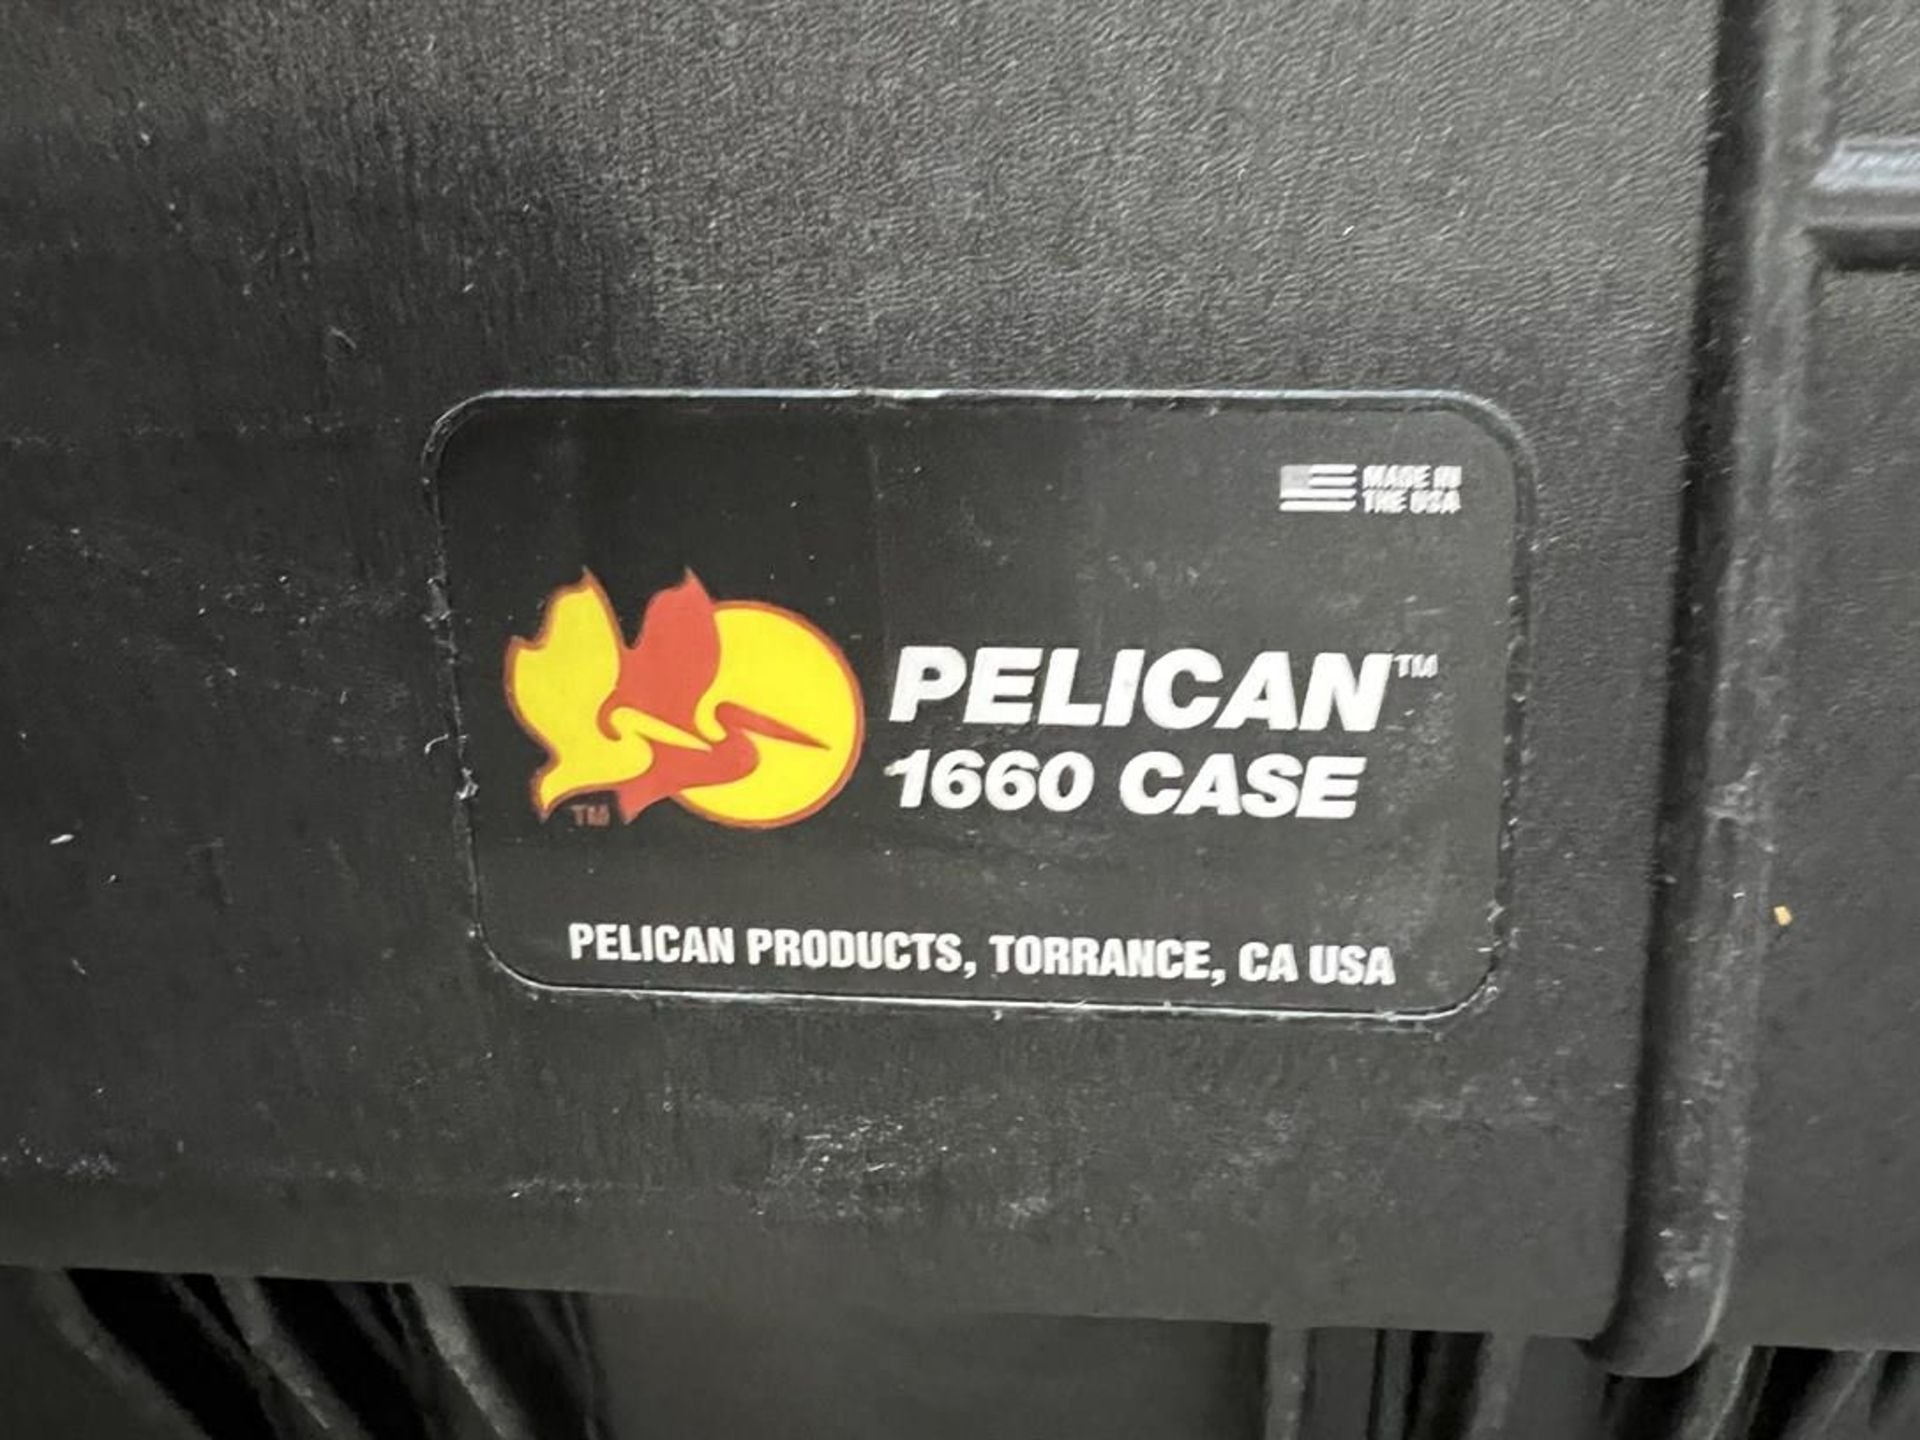 PELICAN 1660 Protective Transport Case - Image 2 of 3